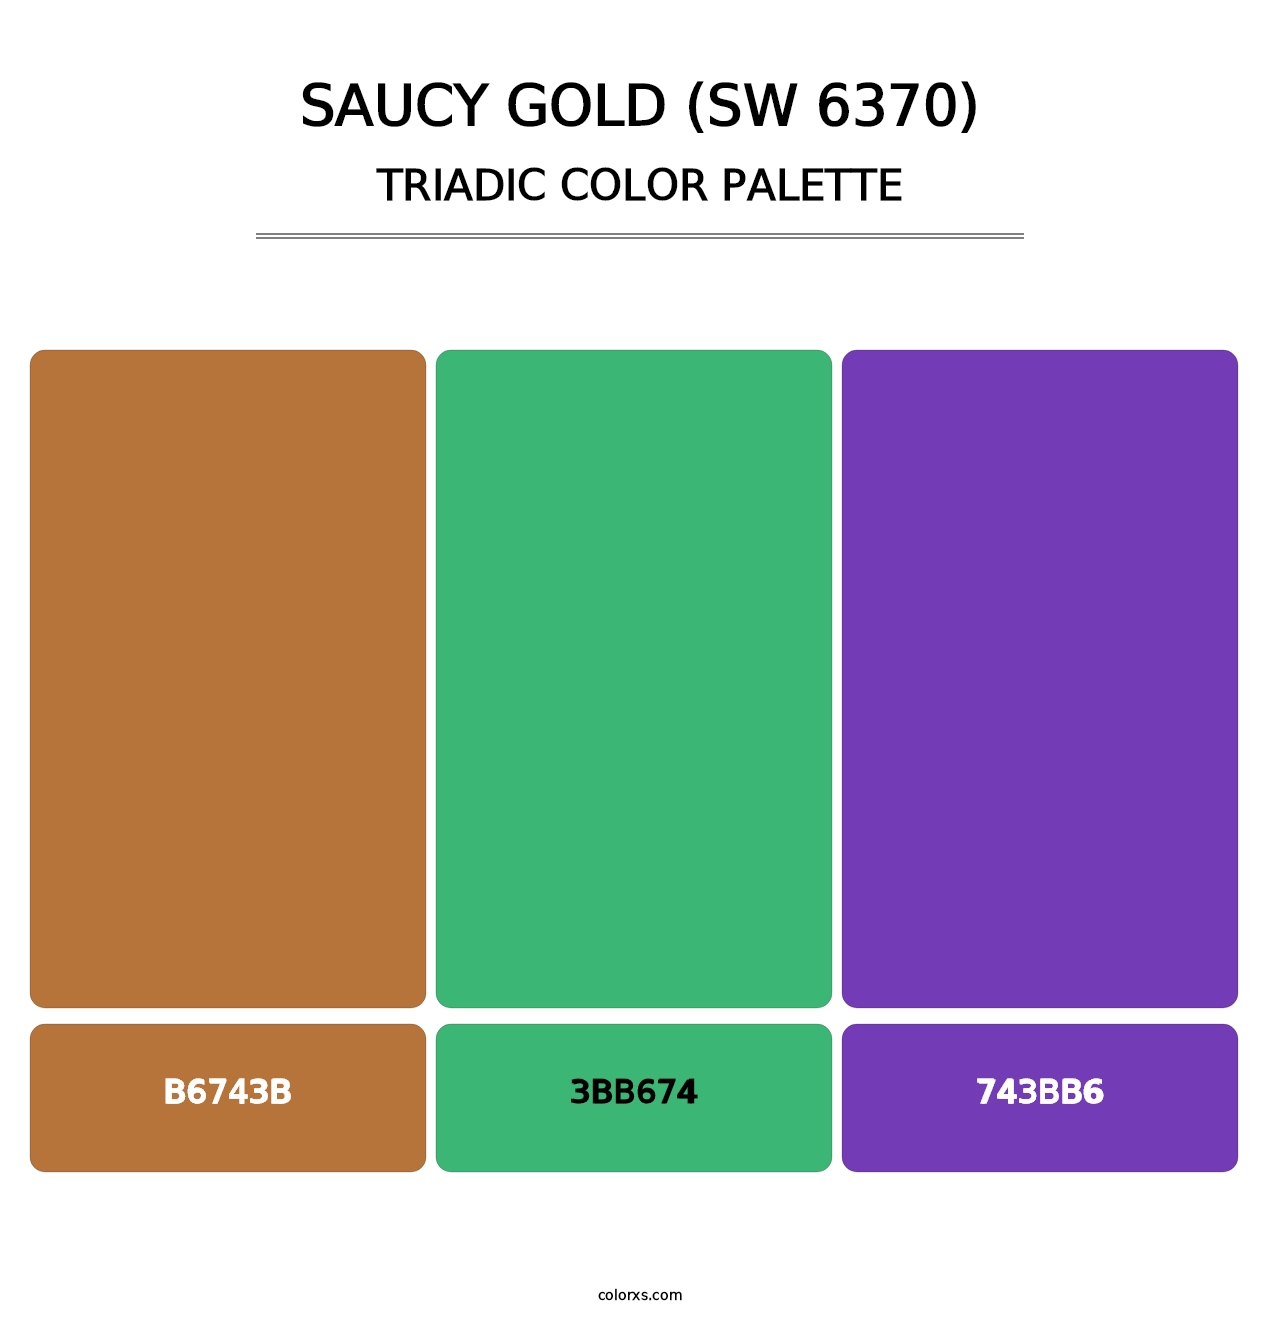 Saucy Gold (SW 6370) - Triadic Color Palette